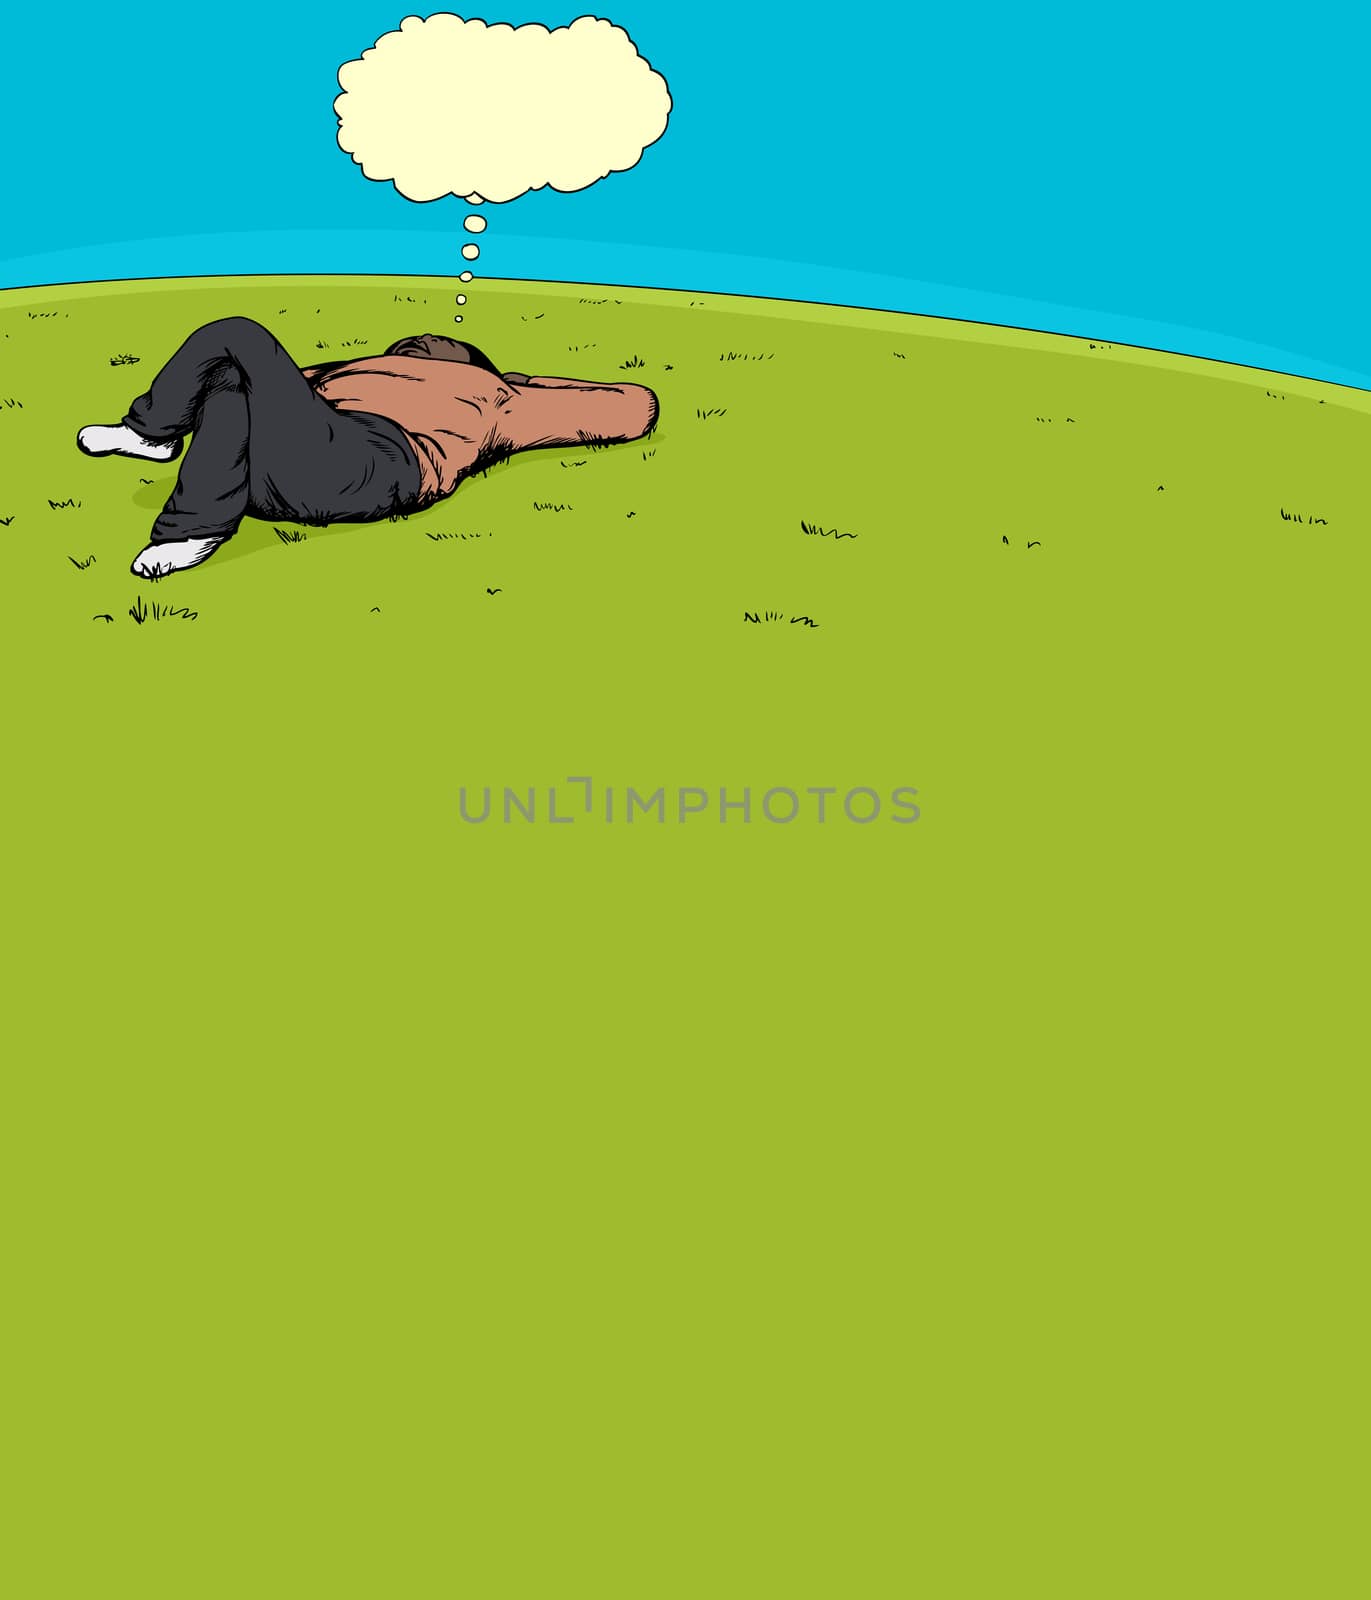 Single adult male thinking while laying down on grass